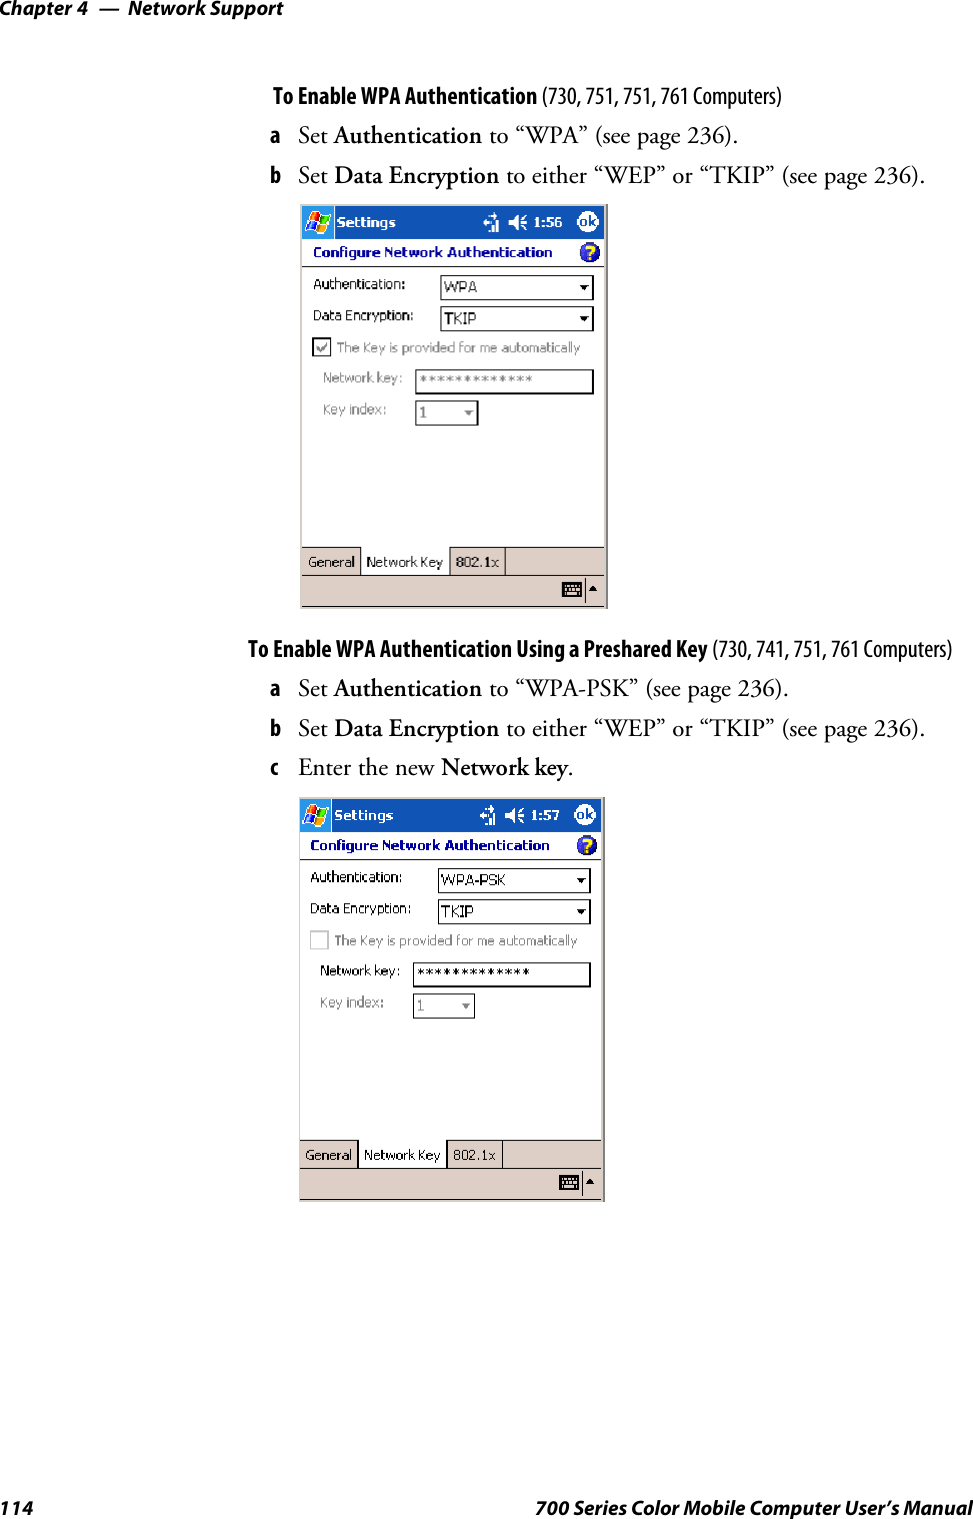 Network SupportChapter —4114 700 Series Color Mobile Computer User’s ManualTo Enable WPA Authentication (730, 751, 751, 761 Computers)aSet Authentication to “WPA” (see page 236).bSet Data Encryption to either “WEP” or “TKIP” (see page 236).To Enable WPA Authentication Using a Preshared Key (730, 741, 751, 761 Computers)aSet Authentication to “WPA-PSK” (see page 236).bSet Data Encryption to either “WEP” or “TKIP” (see page 236).cEnter the new Network key.